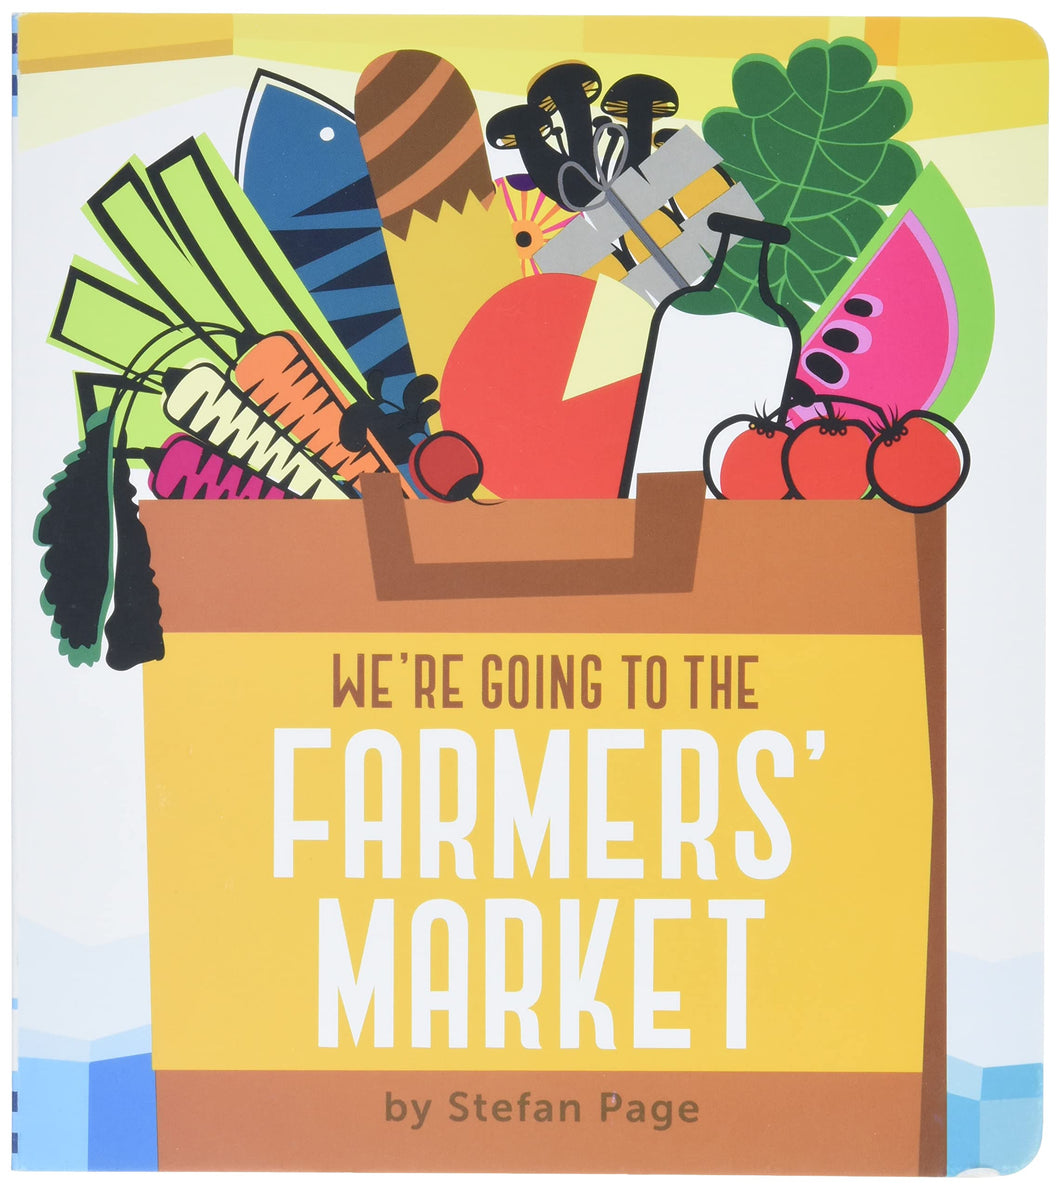 We're Going to the Farmers' Market Board Book [Stefan Page]